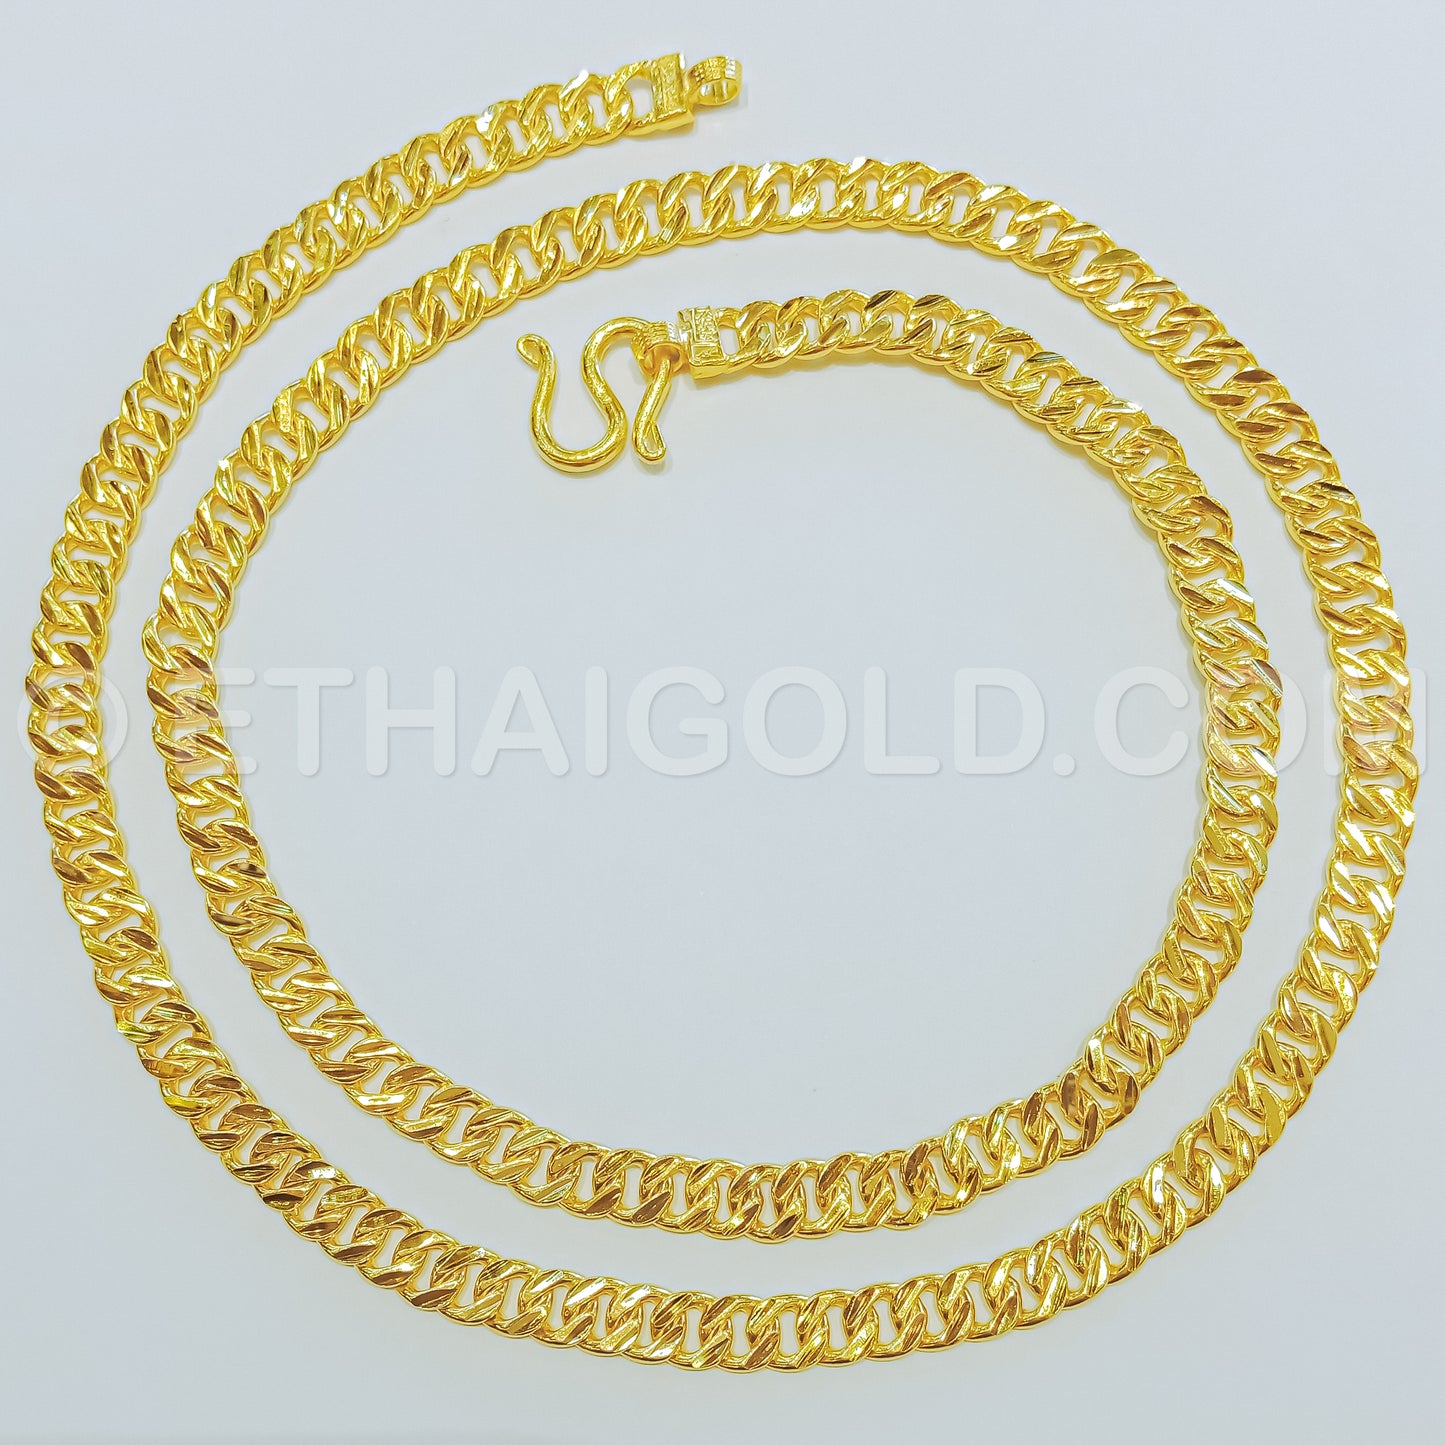 1 BAHT POLISHED DIAMOND-CUT SOLID CURB CHAIN NECKLACE IN 23K GOLD (ID: N0701B)